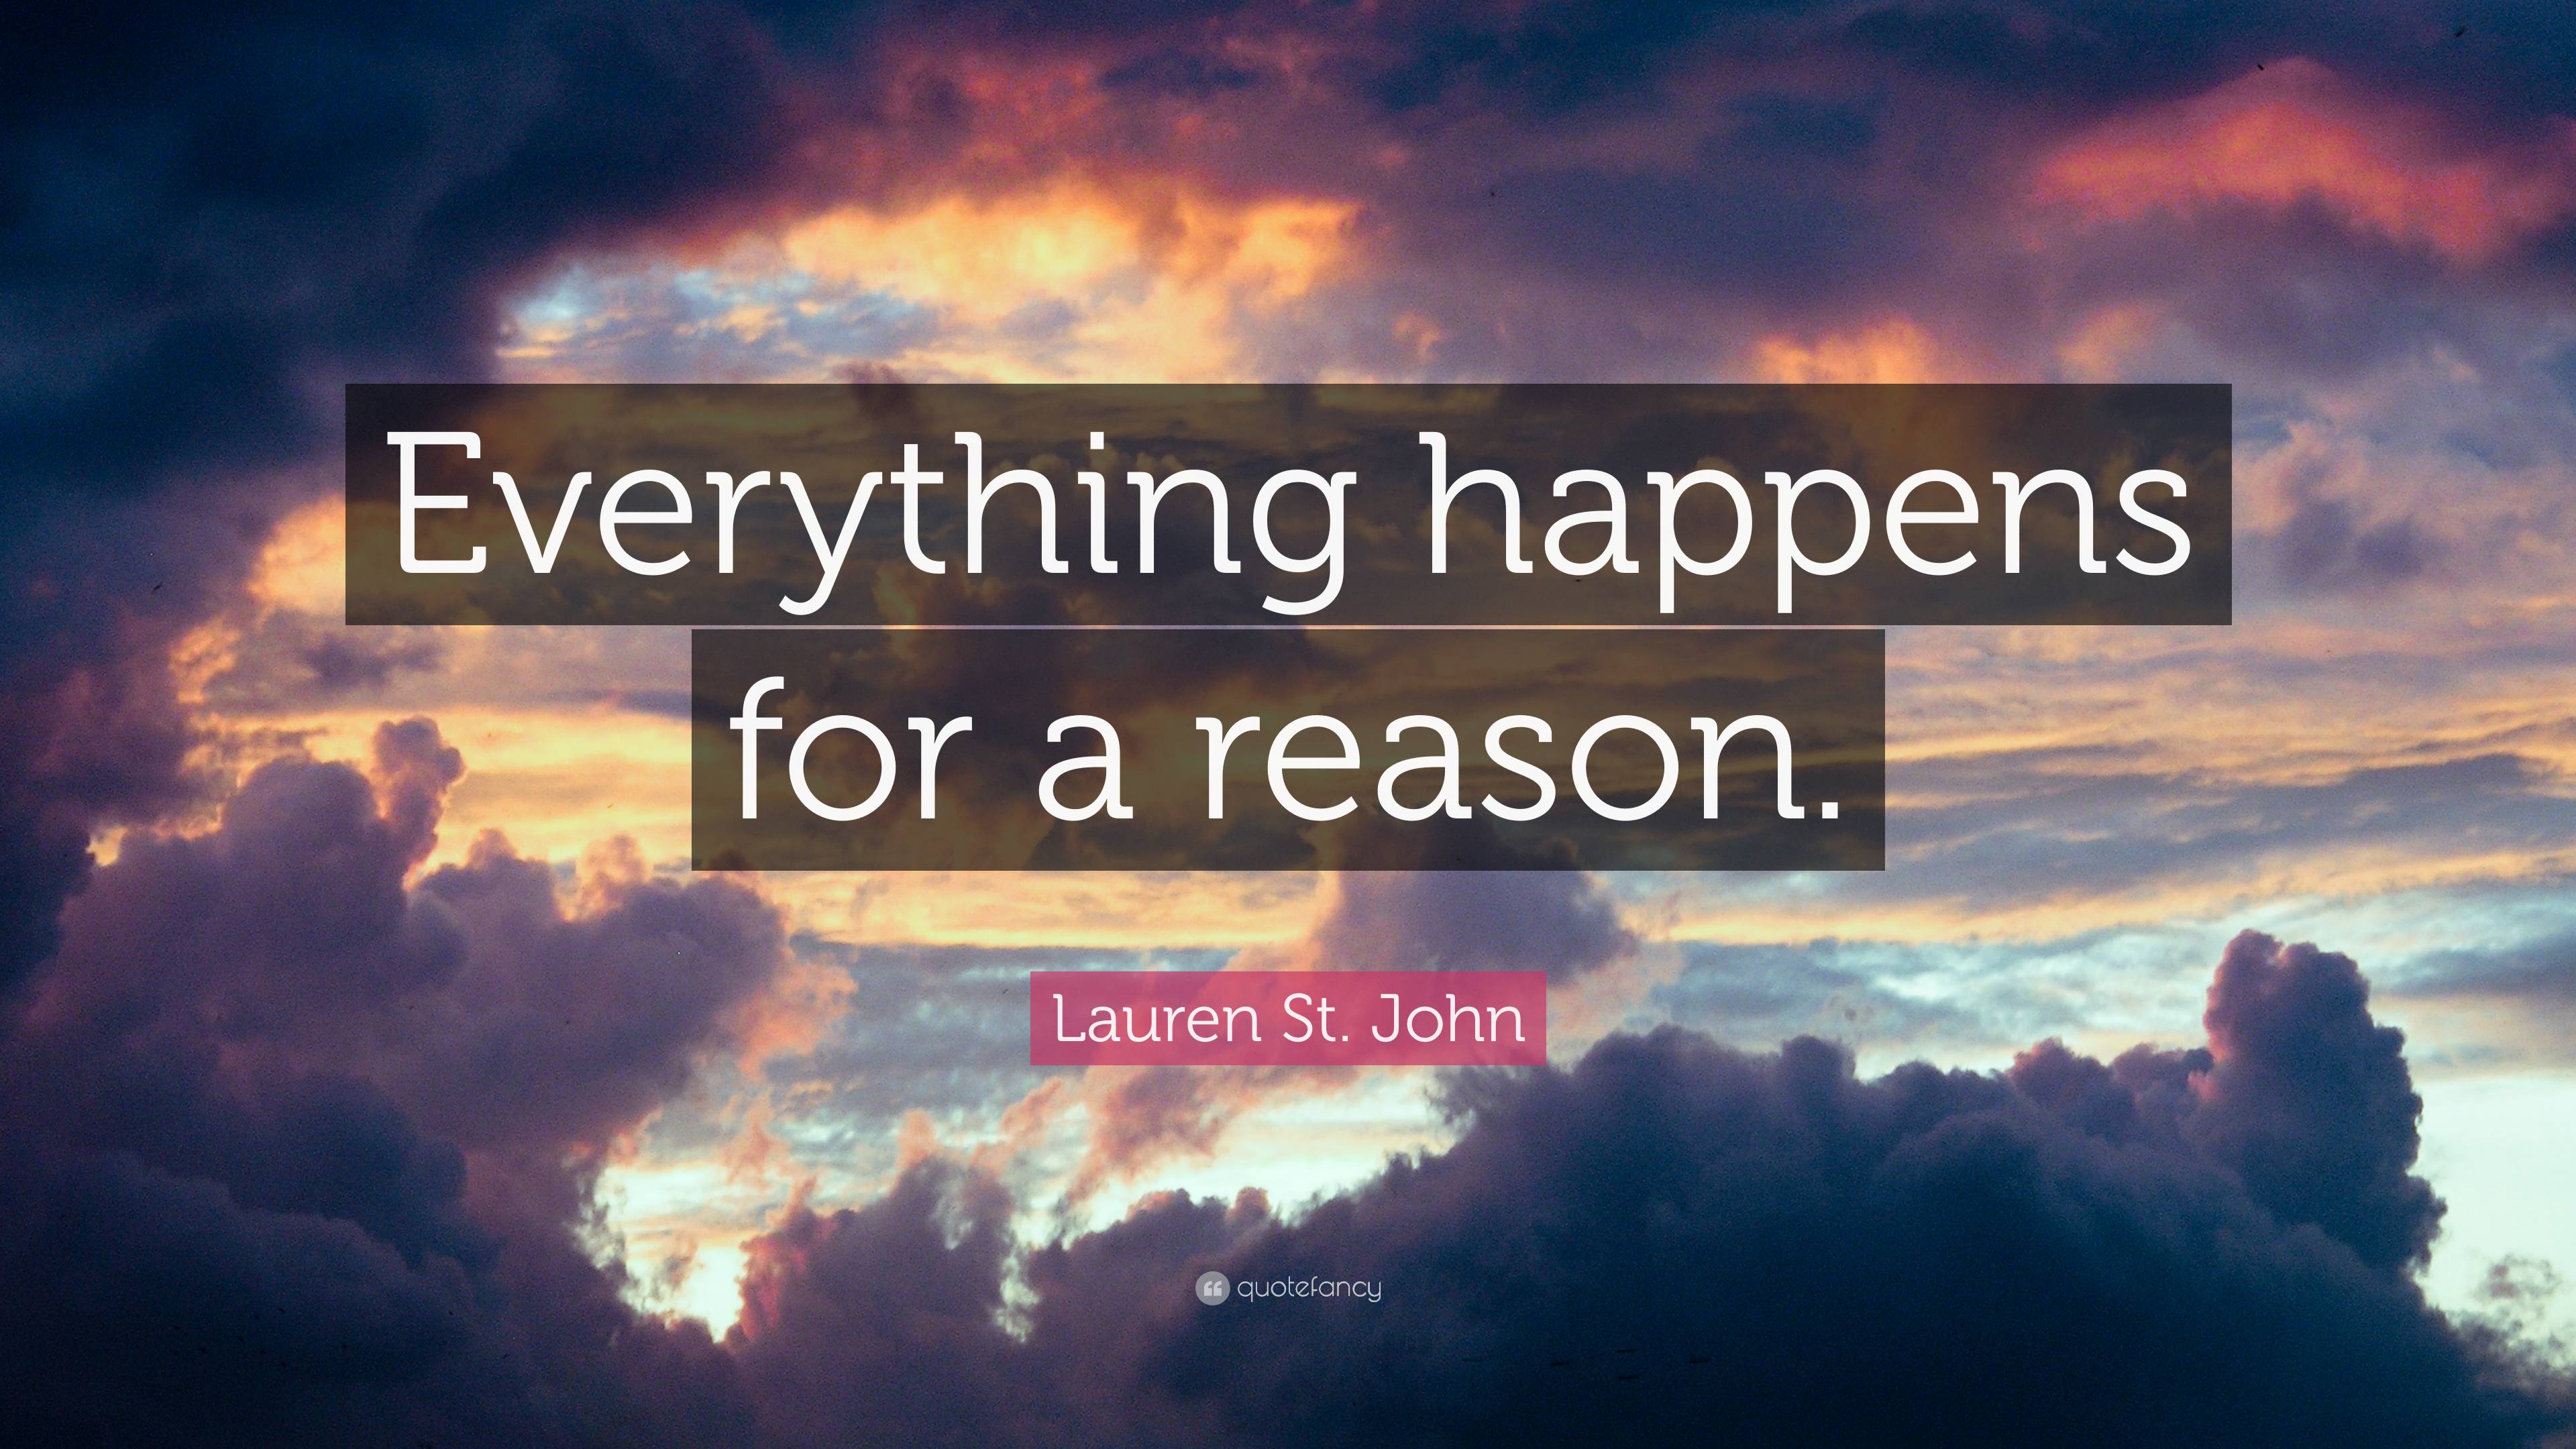 Lauren St. John Quote: “Everything happens for a reason.”